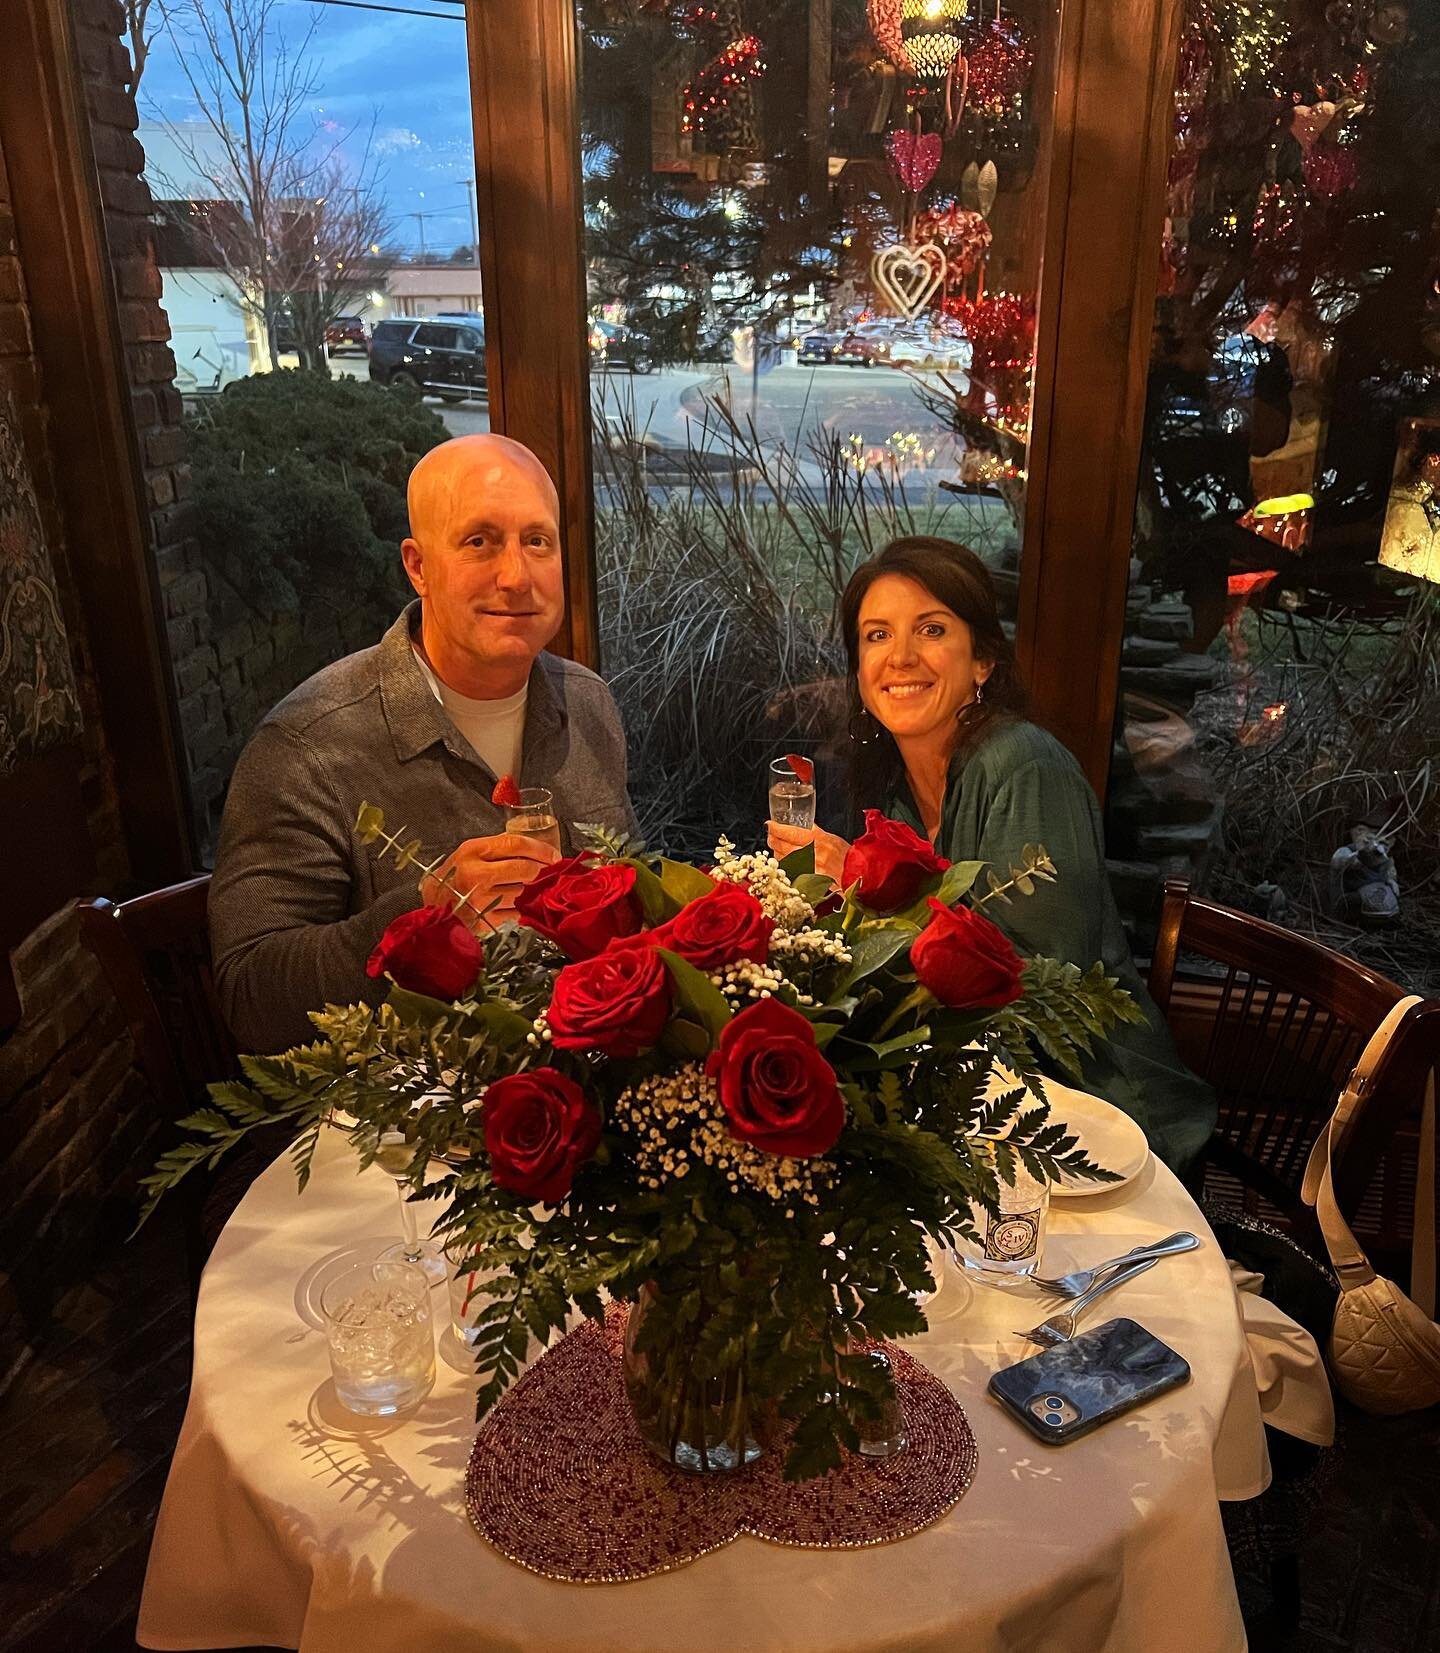 Love is in the air!! What better way to kick of this lovely weekend than a proposal!? Congrats to these two amazing people and loyal customers of Scarbourgh Fair. We are so happy for both of you and honored that you chose us for this special moment. 